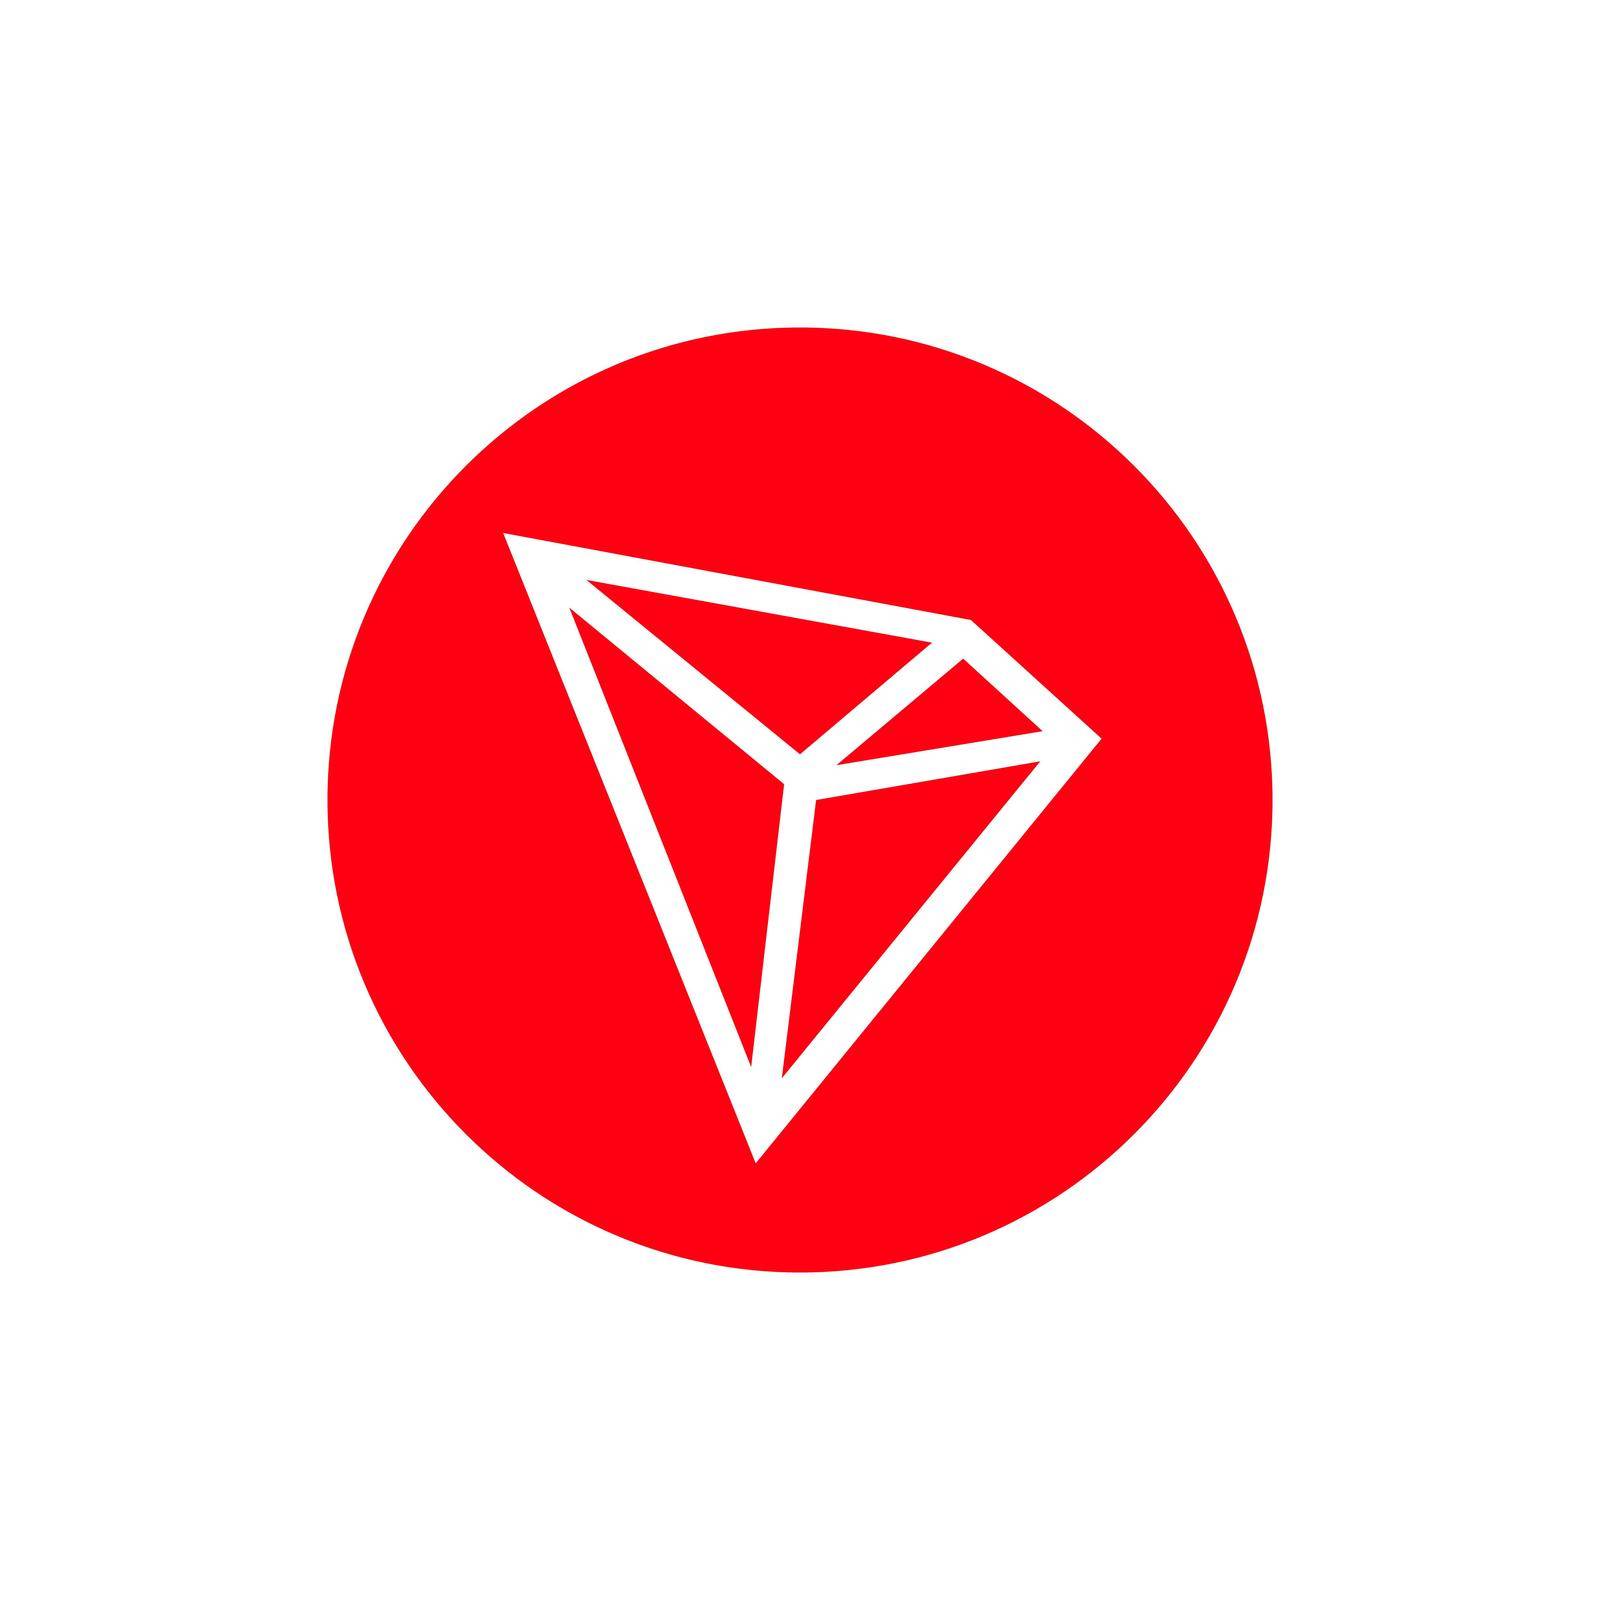 Tron (TRX) coin icon isolated on white background.